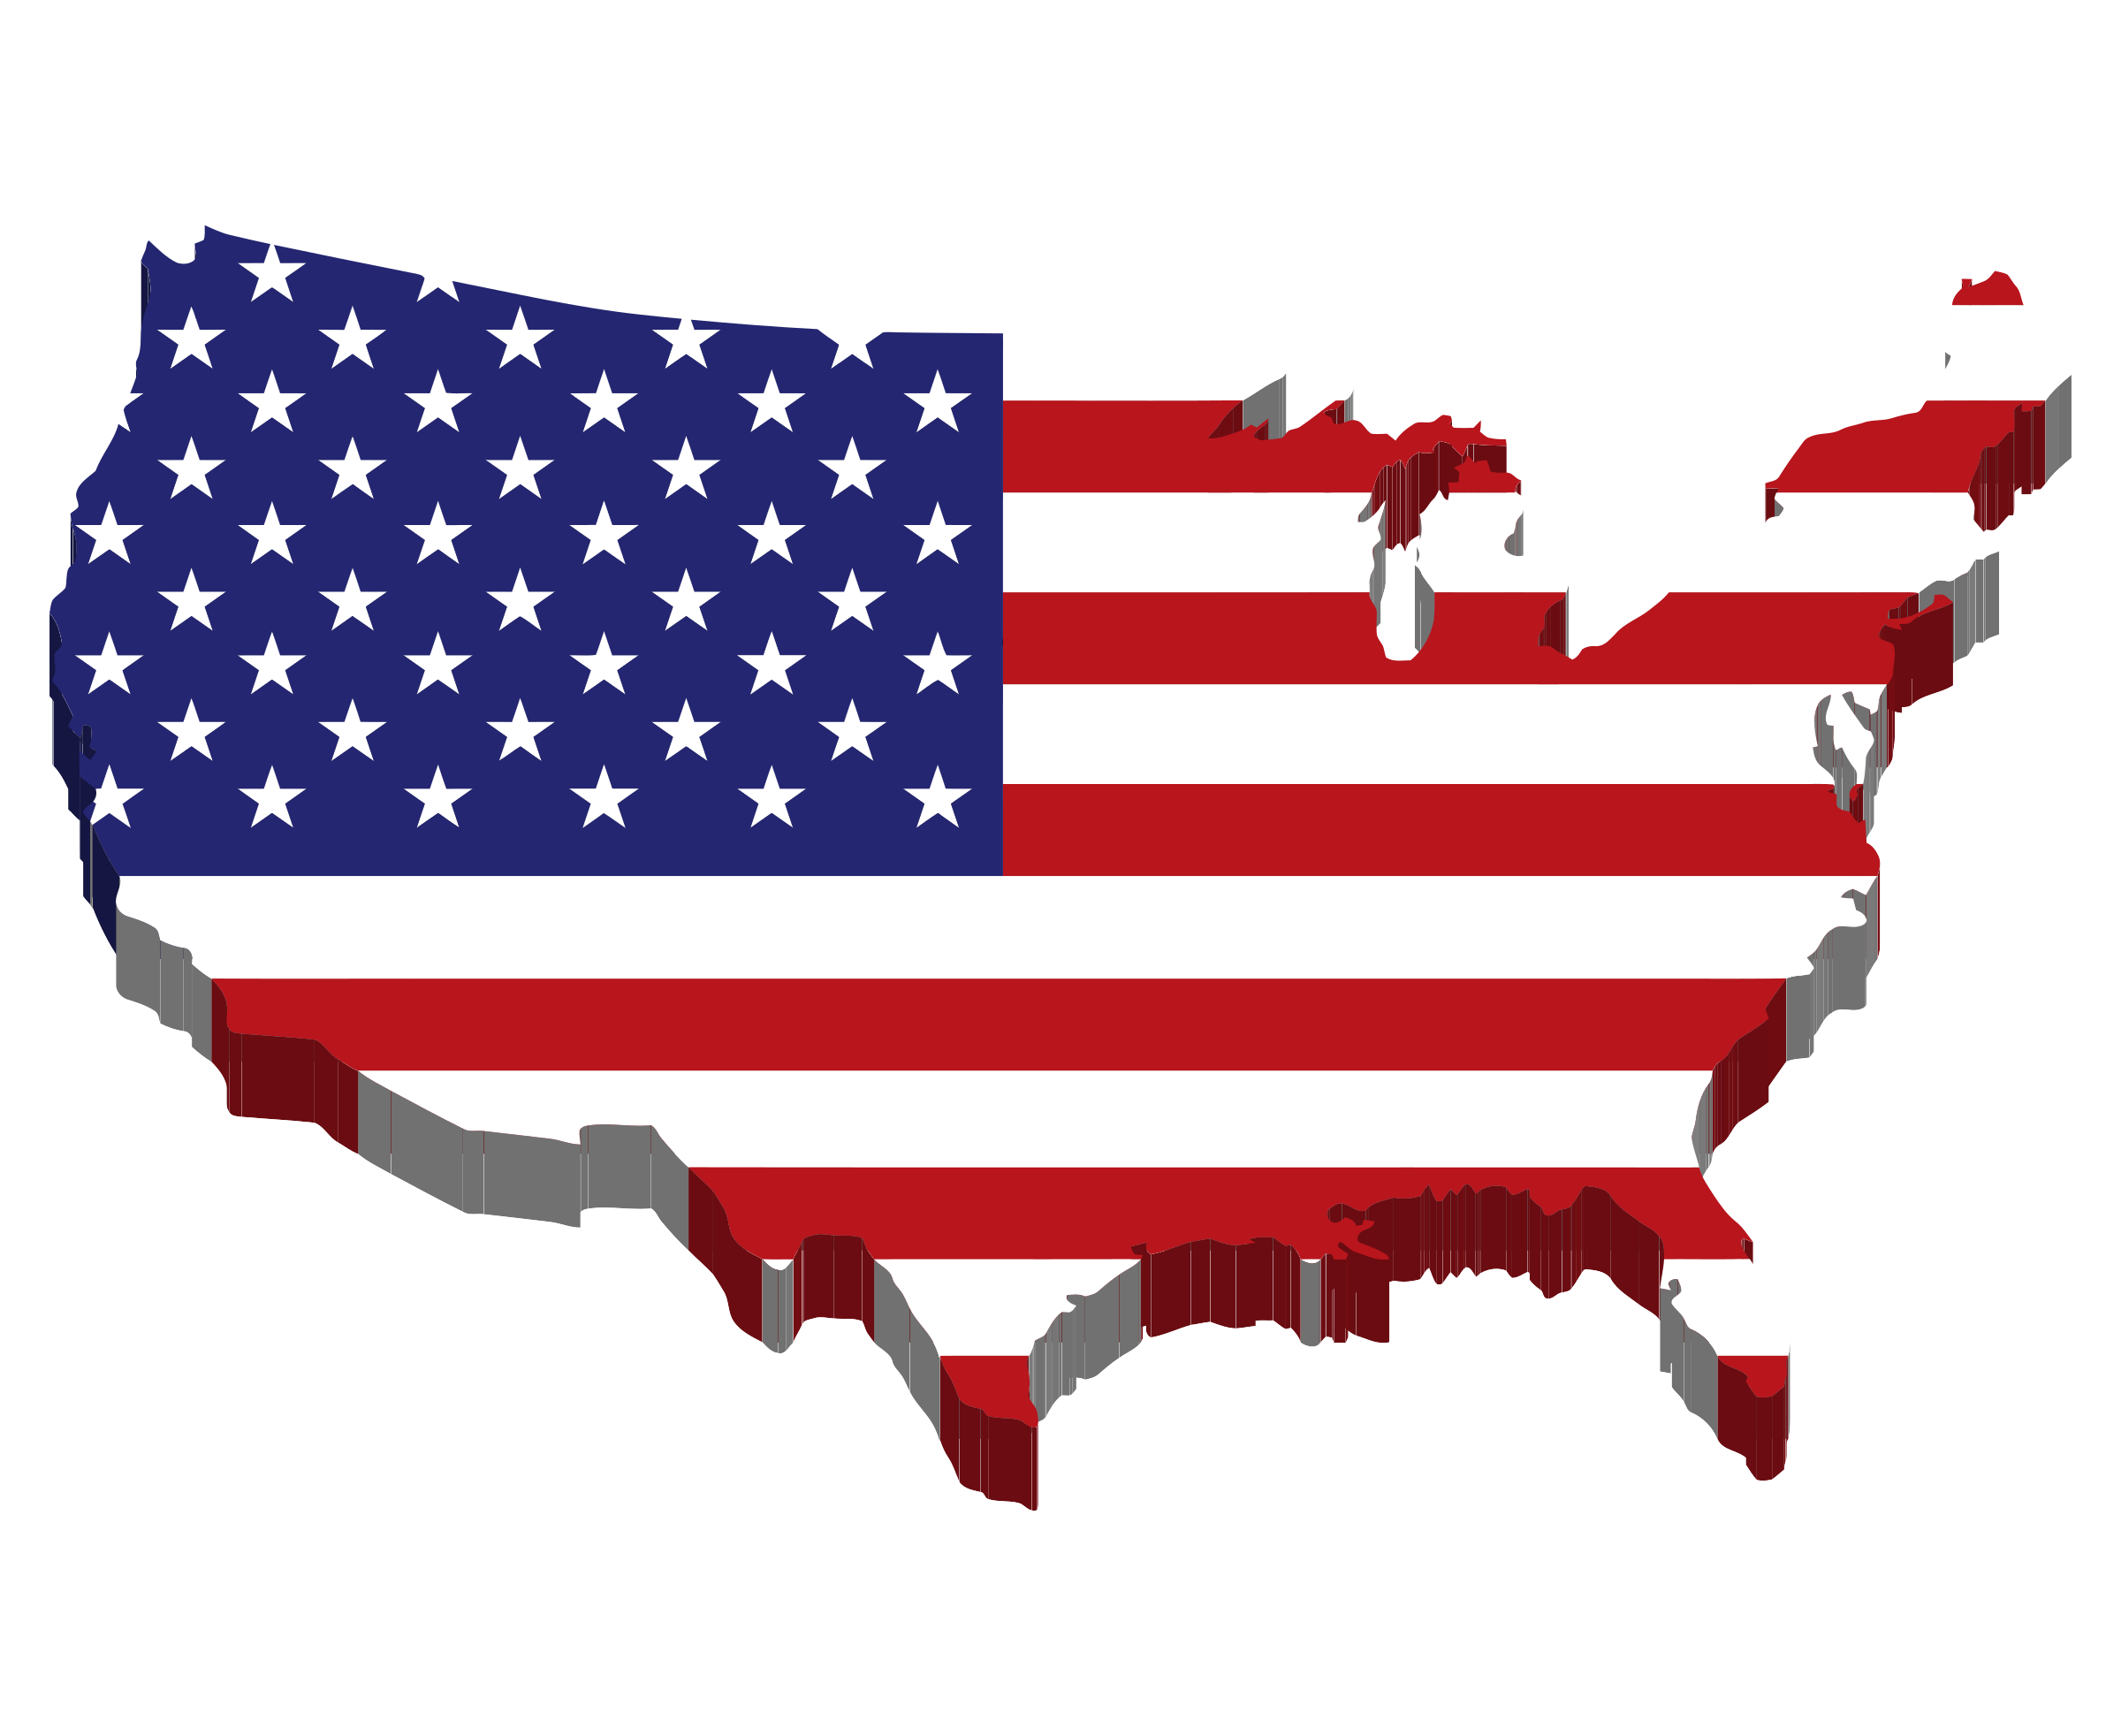 United states of america. Clipart map state